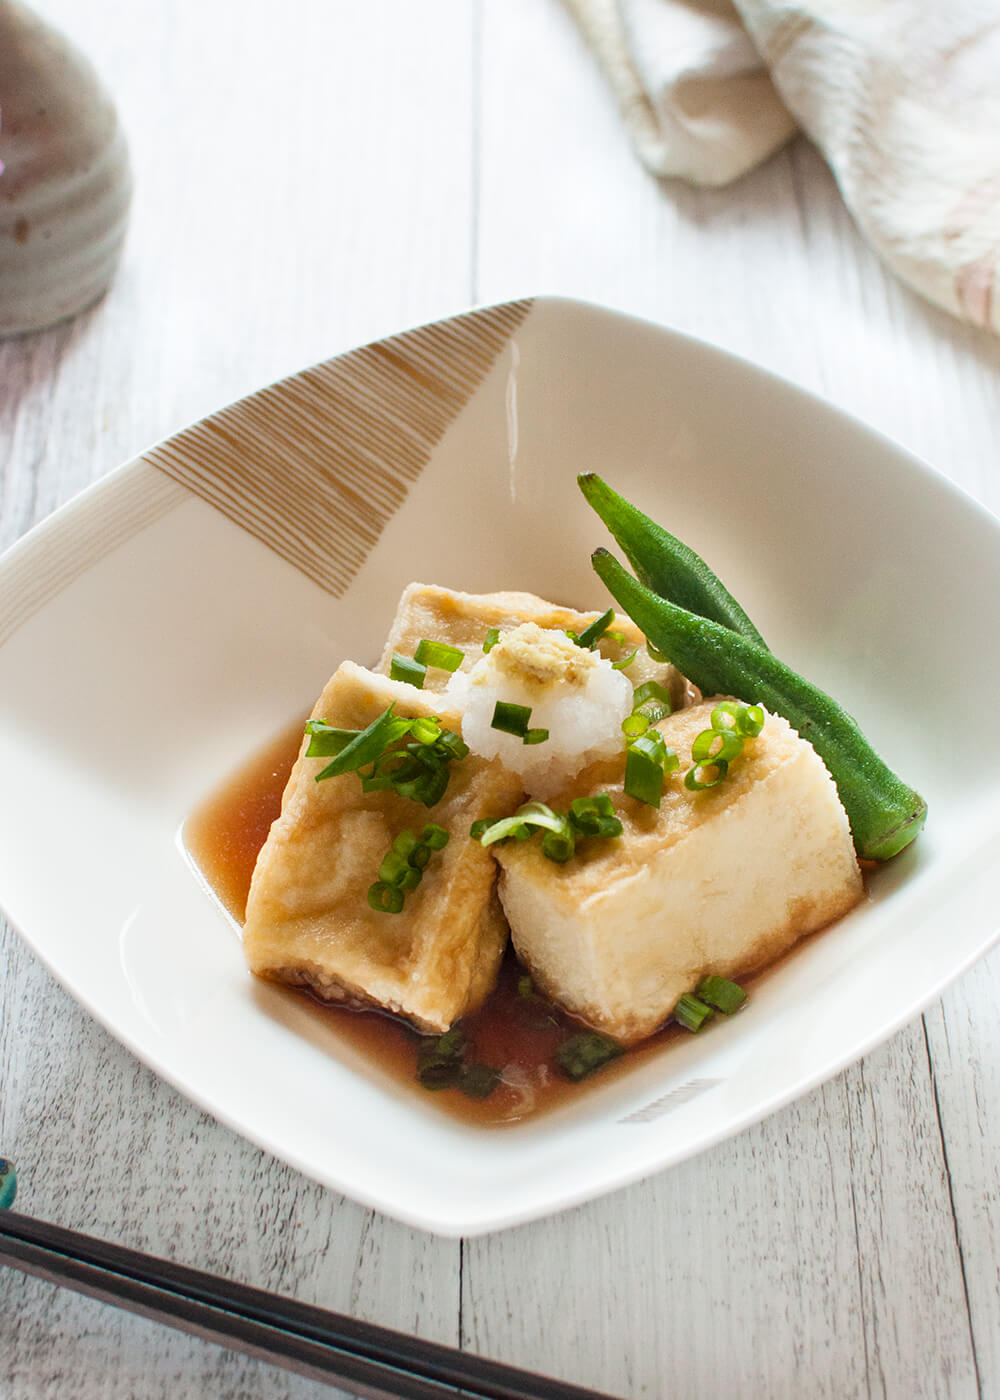 Agedashi Tofu (or Agedashi Dofu) is one of the a-la-carte dishes you always find on the menu at Japanese restaurants. It is delicate and simple but so yummy. The sweet soy sauce-based dashi goes so well with deep fried tofu. 